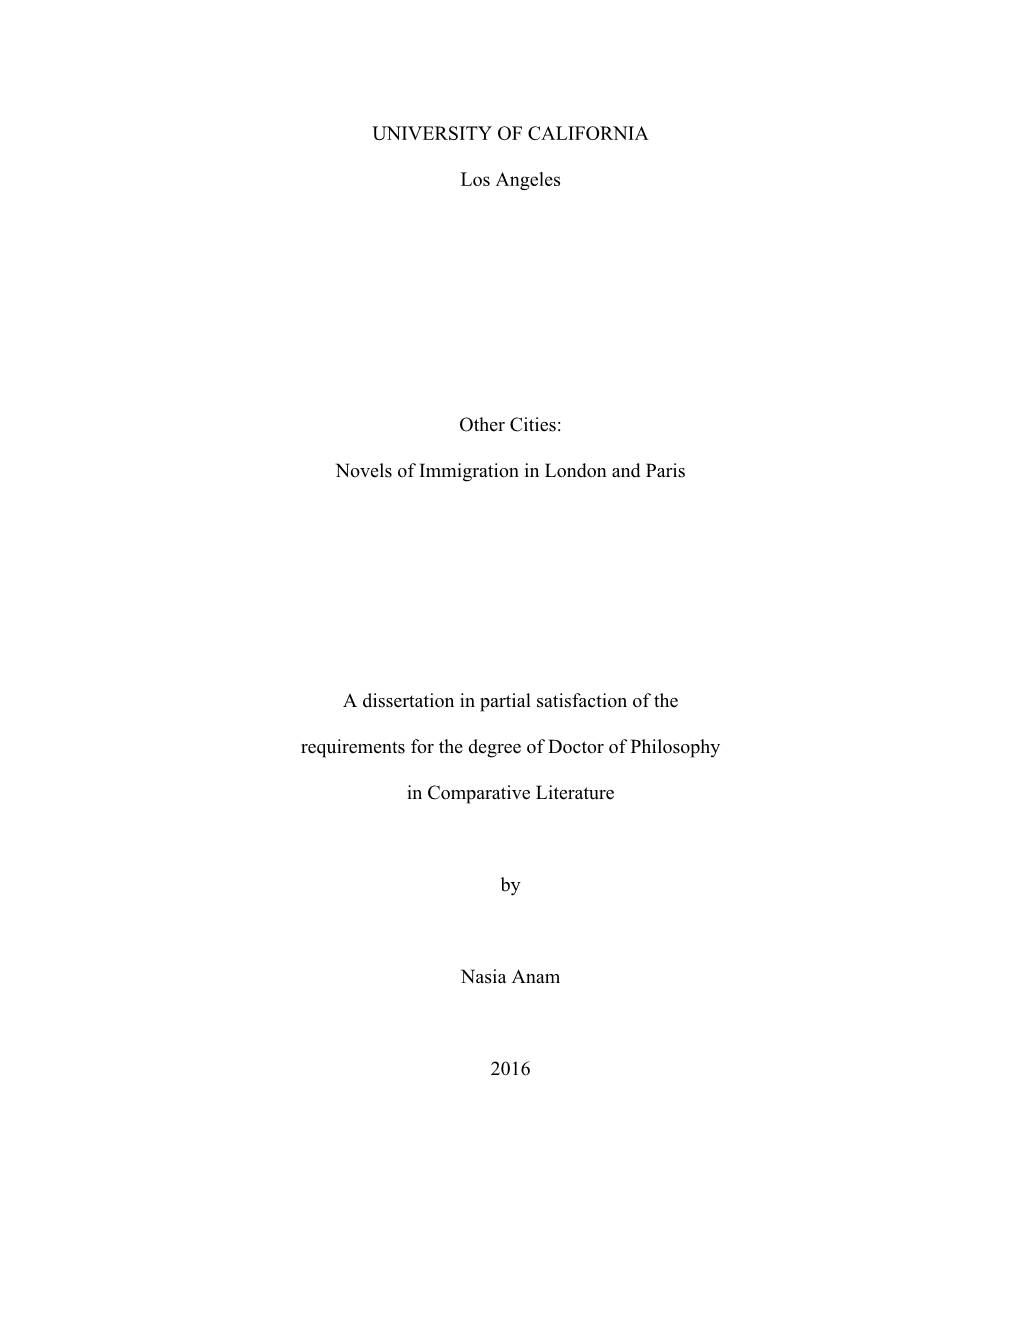 Novels of Immigration in London and Paris a Dissertation in Partial Satisfac